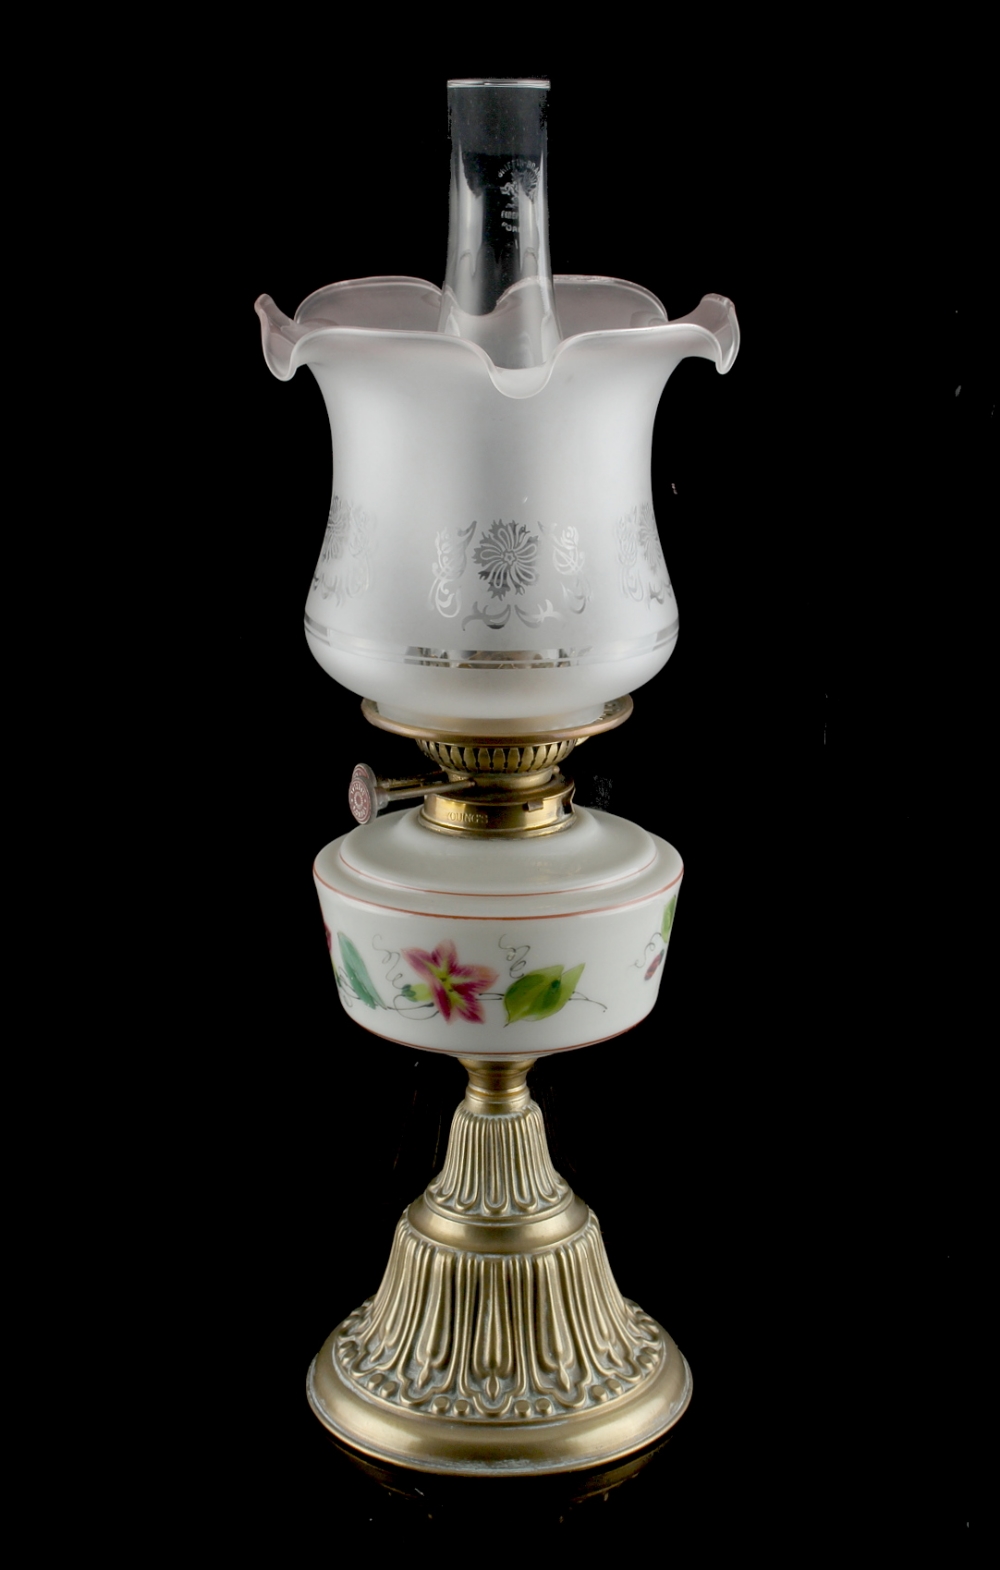 Property of a gentleman - a late 19th / early 20th century paraffin oil lamp with floral painted